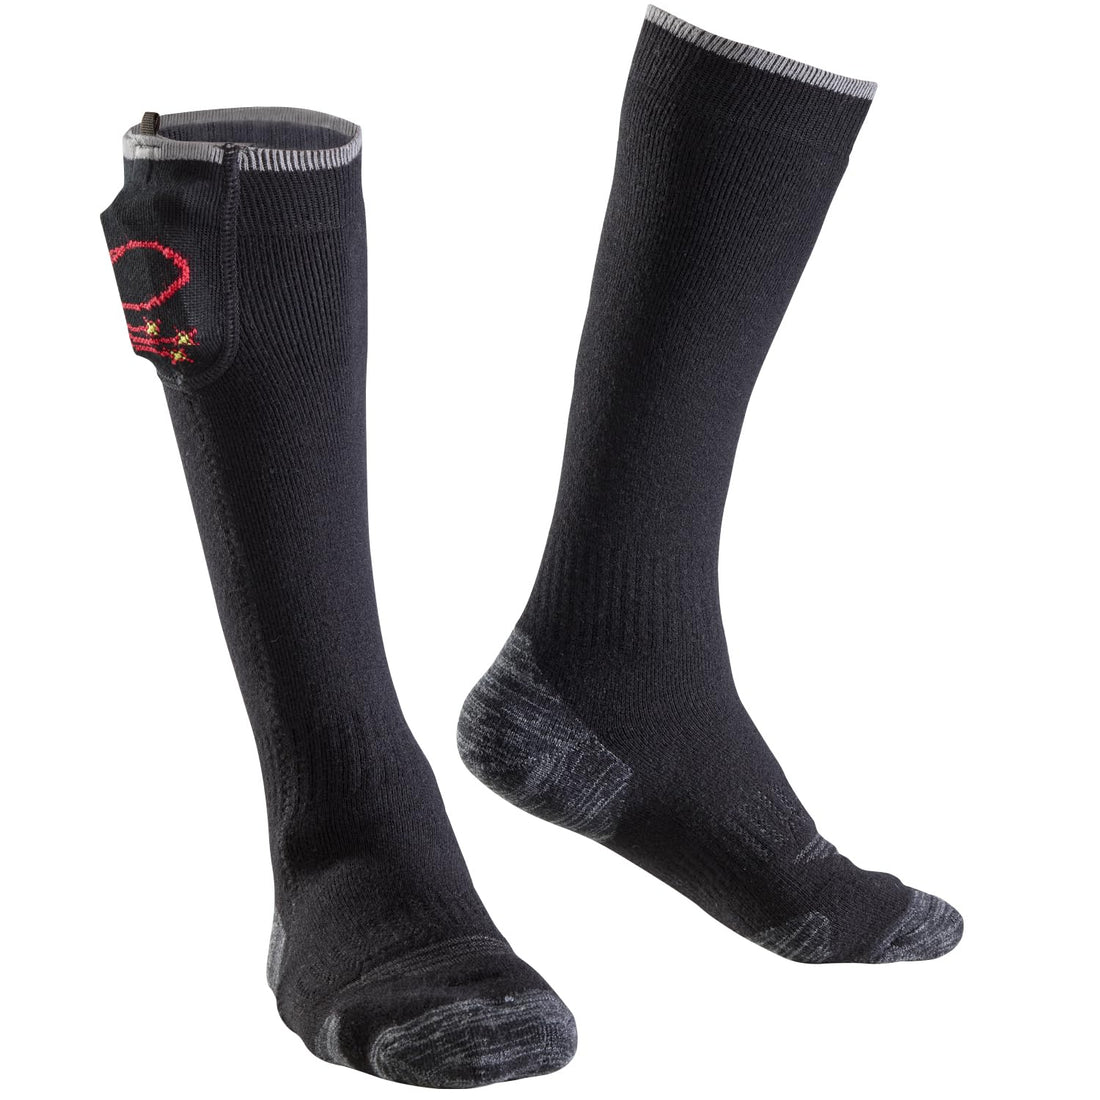 ENERGY TECHWEAR Unisex Heated Socks with High Flexibility Heat Modules with Rechargeable Battery, Bluetooth App, Short Circuit Protection, Combat Cold Weather, for Outdoor Activities